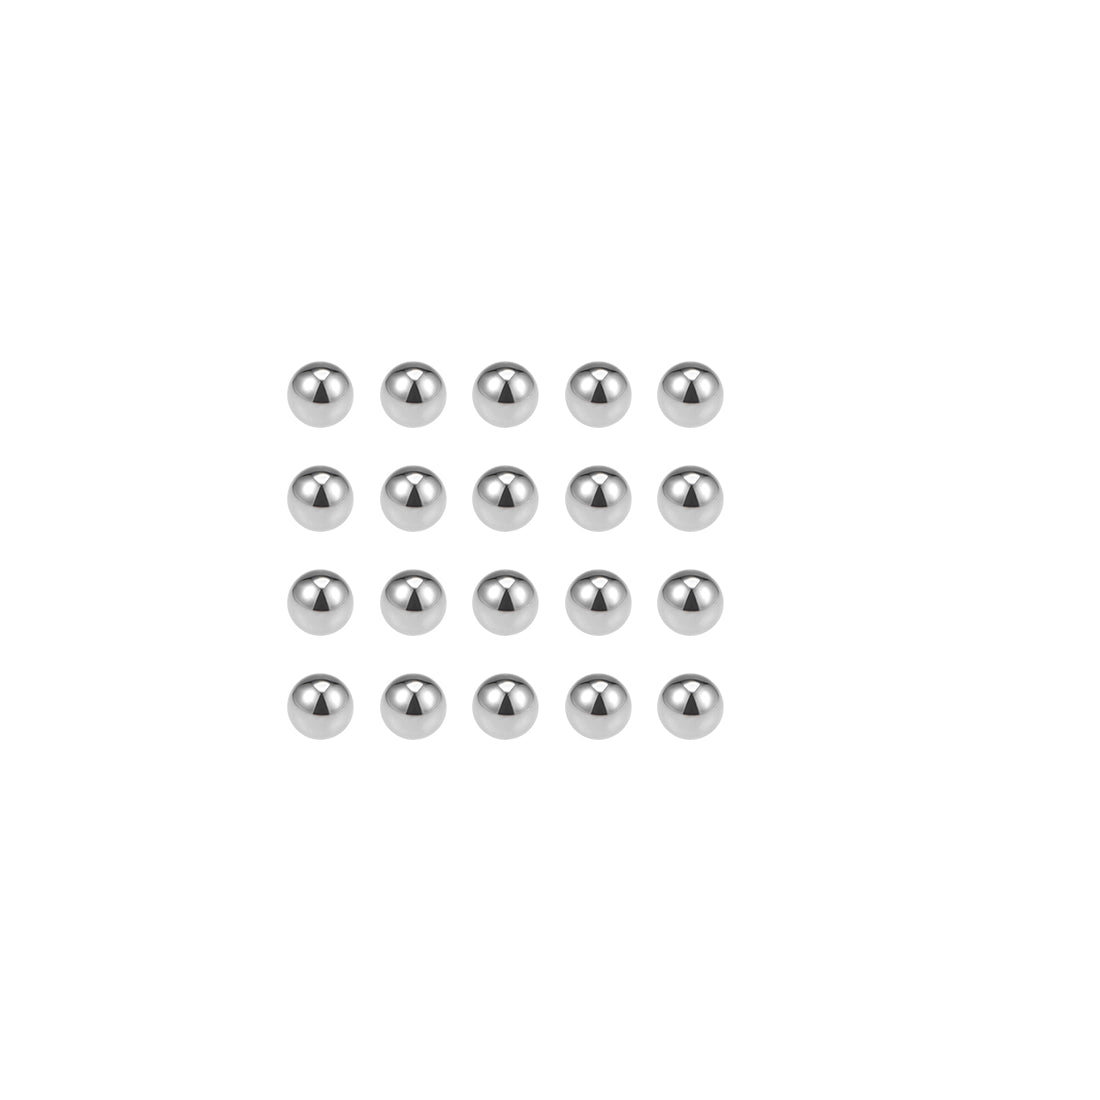 uxcell Uxcell Precision Balls 3/8" Solid Chrome Steel G25 for Ball Bearing Wheel 100pcs